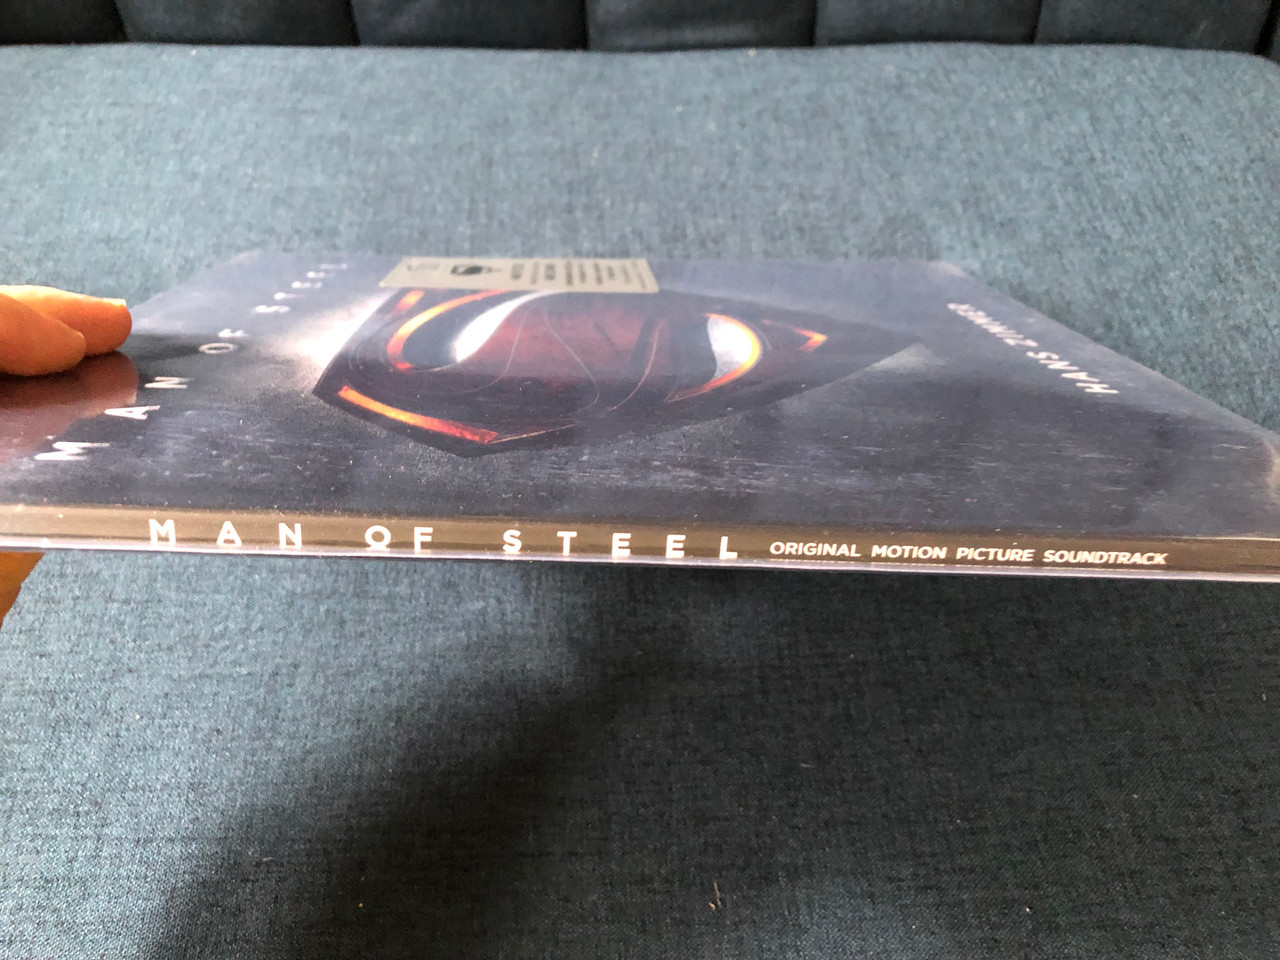 https://cdn10.bigcommerce.com/s-62bdpkt7pb/products/0/images/230414/Man_Of_Steel_-_Hans_Zimmer_Motion_Picture_Soundtrack_By_Hans_Zimmer._Limited_edition_of_2008_copies_on_translucent_red_vinyl._Includes_a_4-page_booklet_fridge_magnet._180_gram_audiophile_4__77749.1654014649.1280.1280.JPG?c=2&_gl=1*11efl2a*_ga*MjA2NTIxMjE2MC4xNTkwNTEyNTMy*_ga_WS2VZYPC6G*MTY1NDAwNTAzNy40MTUuMS4xNjU0MDE0NTk4LjYw